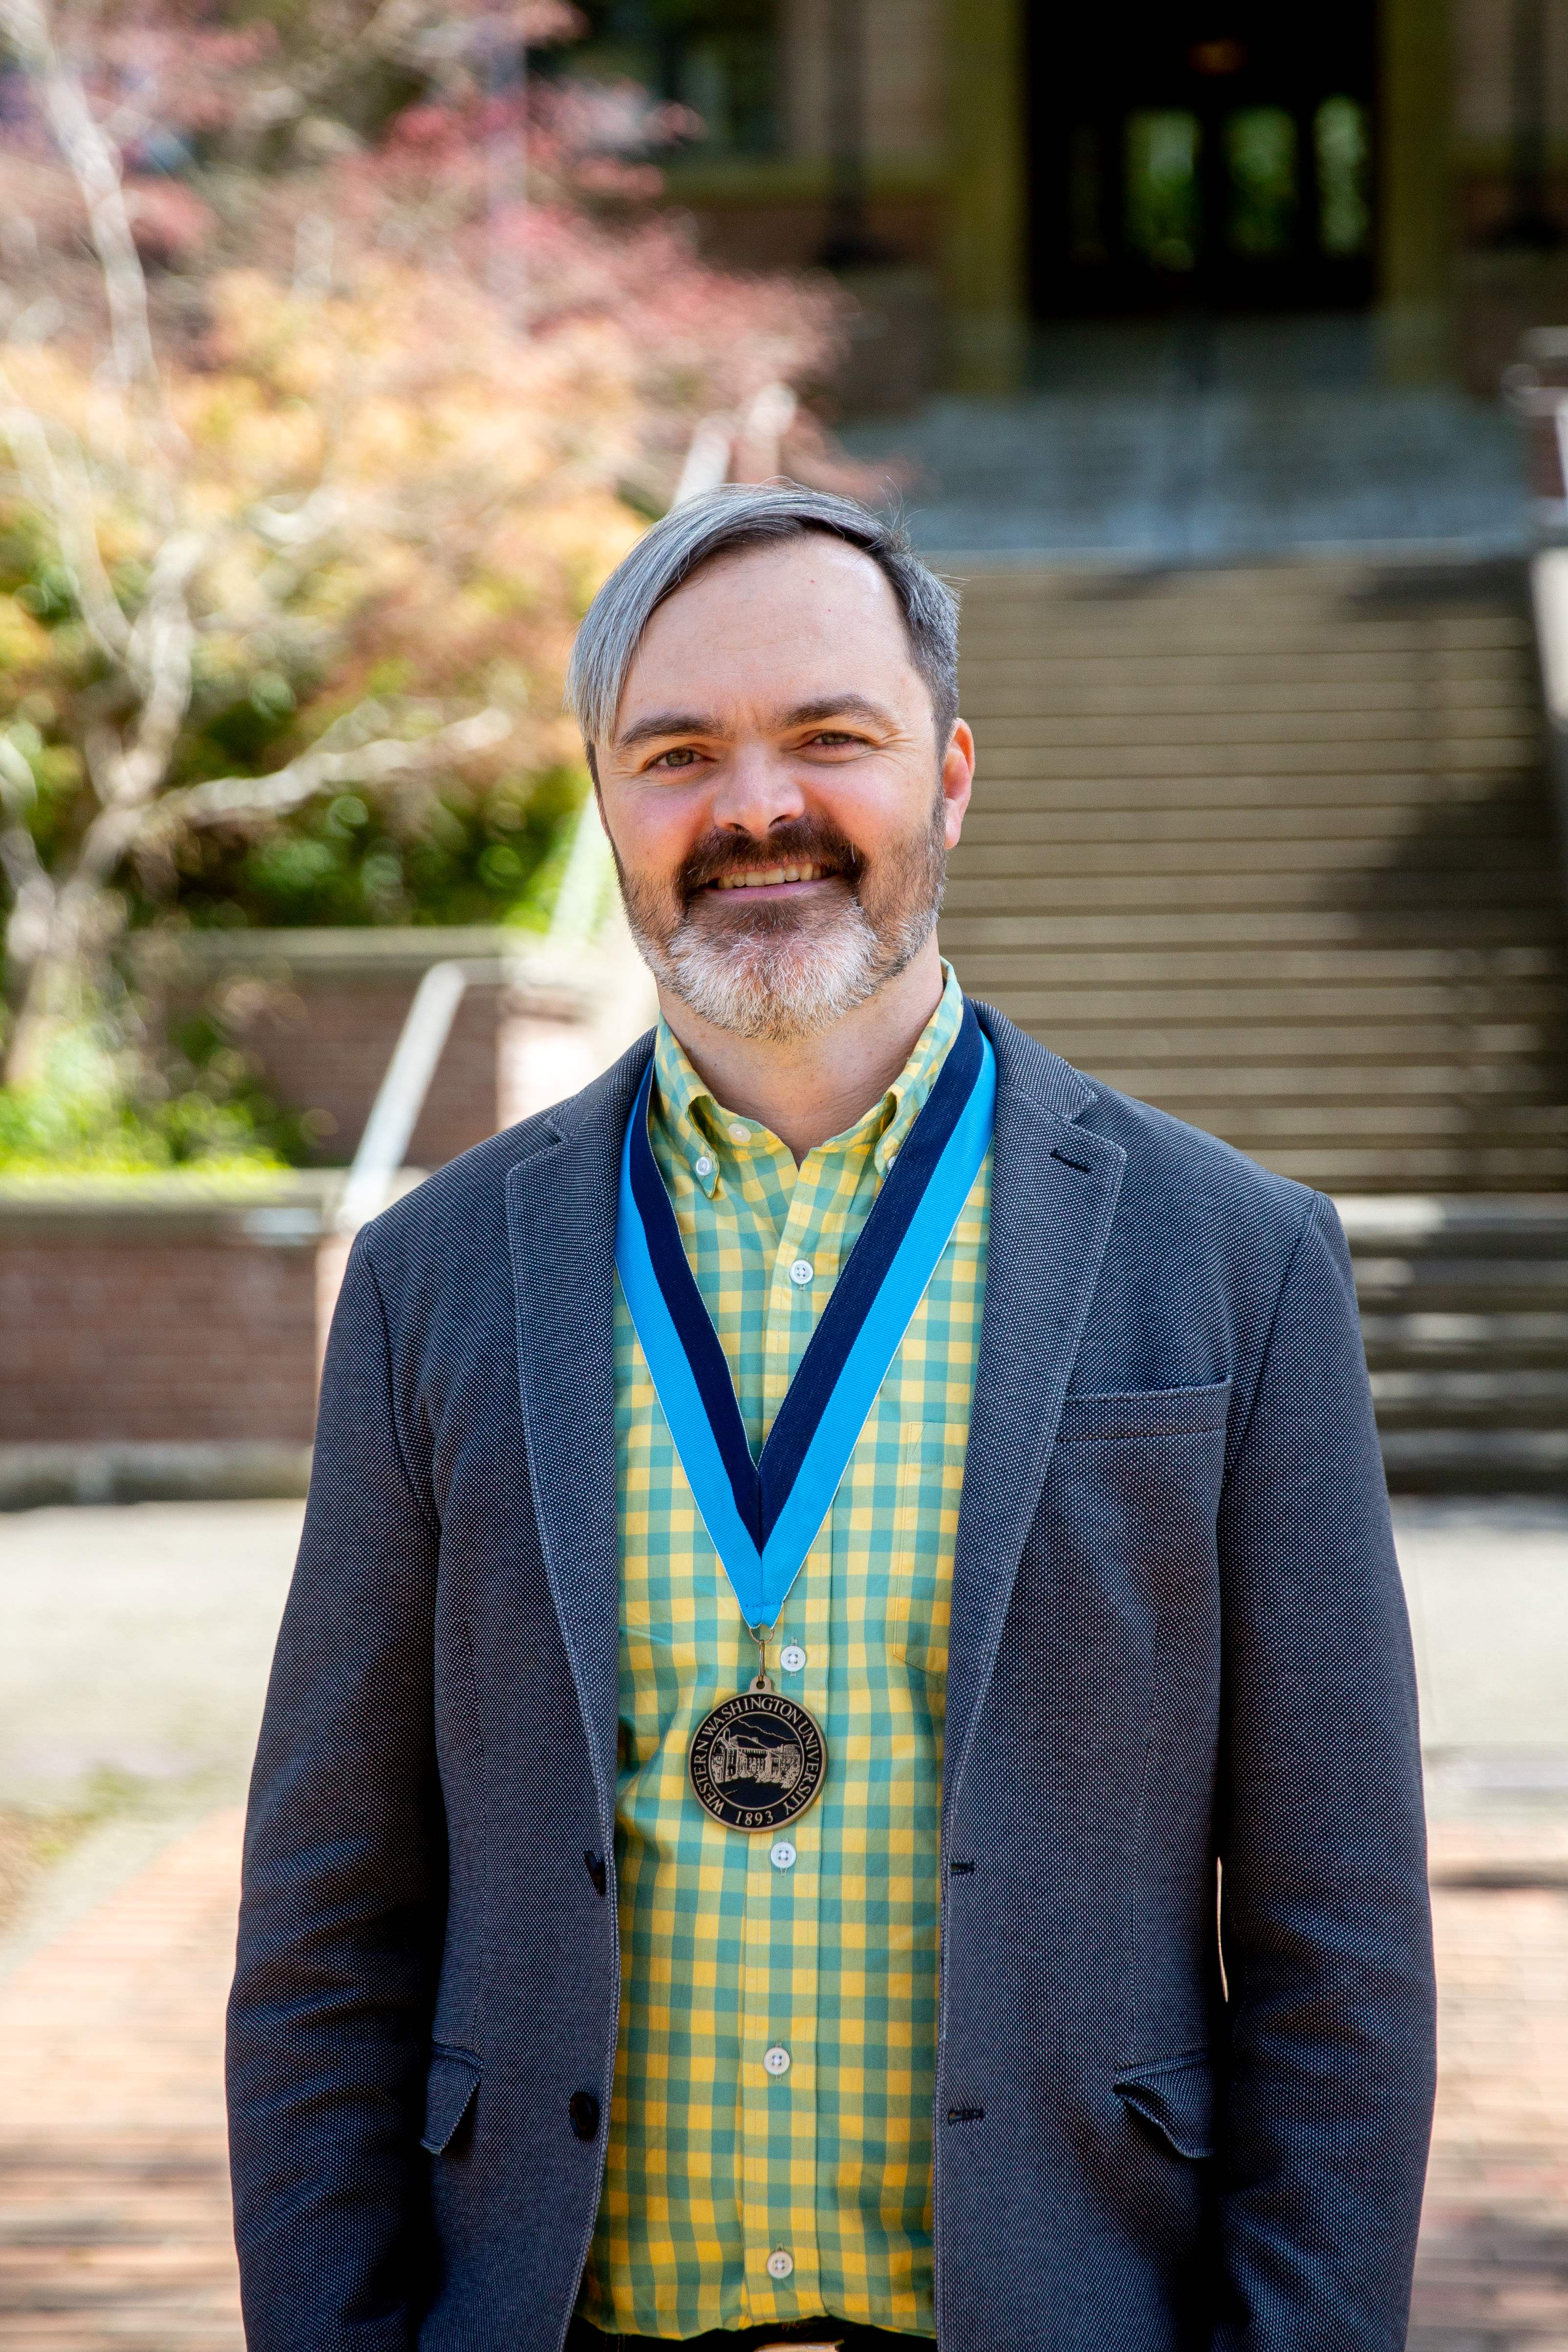 Daniel Chard in a yellow and blue plaid shirt and jacket with a WWU award medallion on a neck ribbon